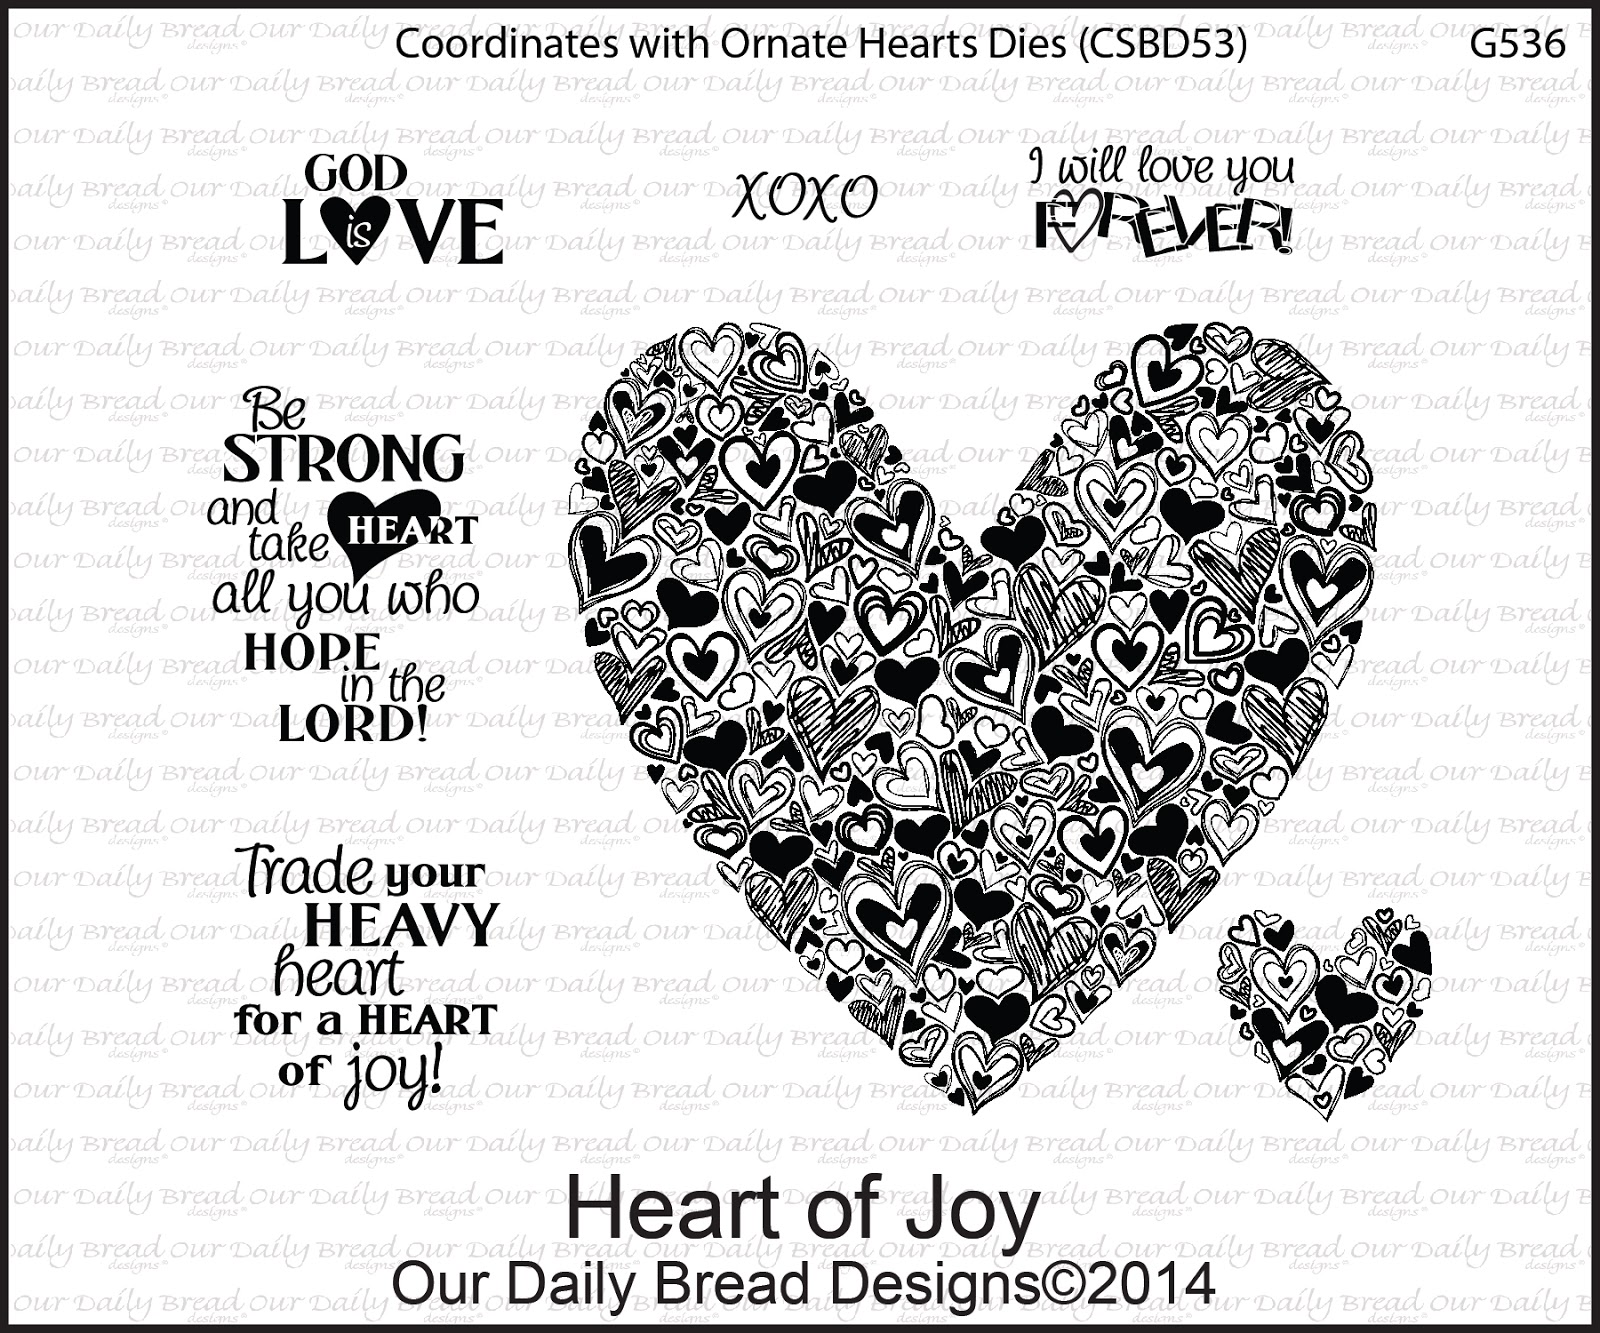 http://www.ourdailybreaddesigns.com/index.php/g536-heart-of-joy.html